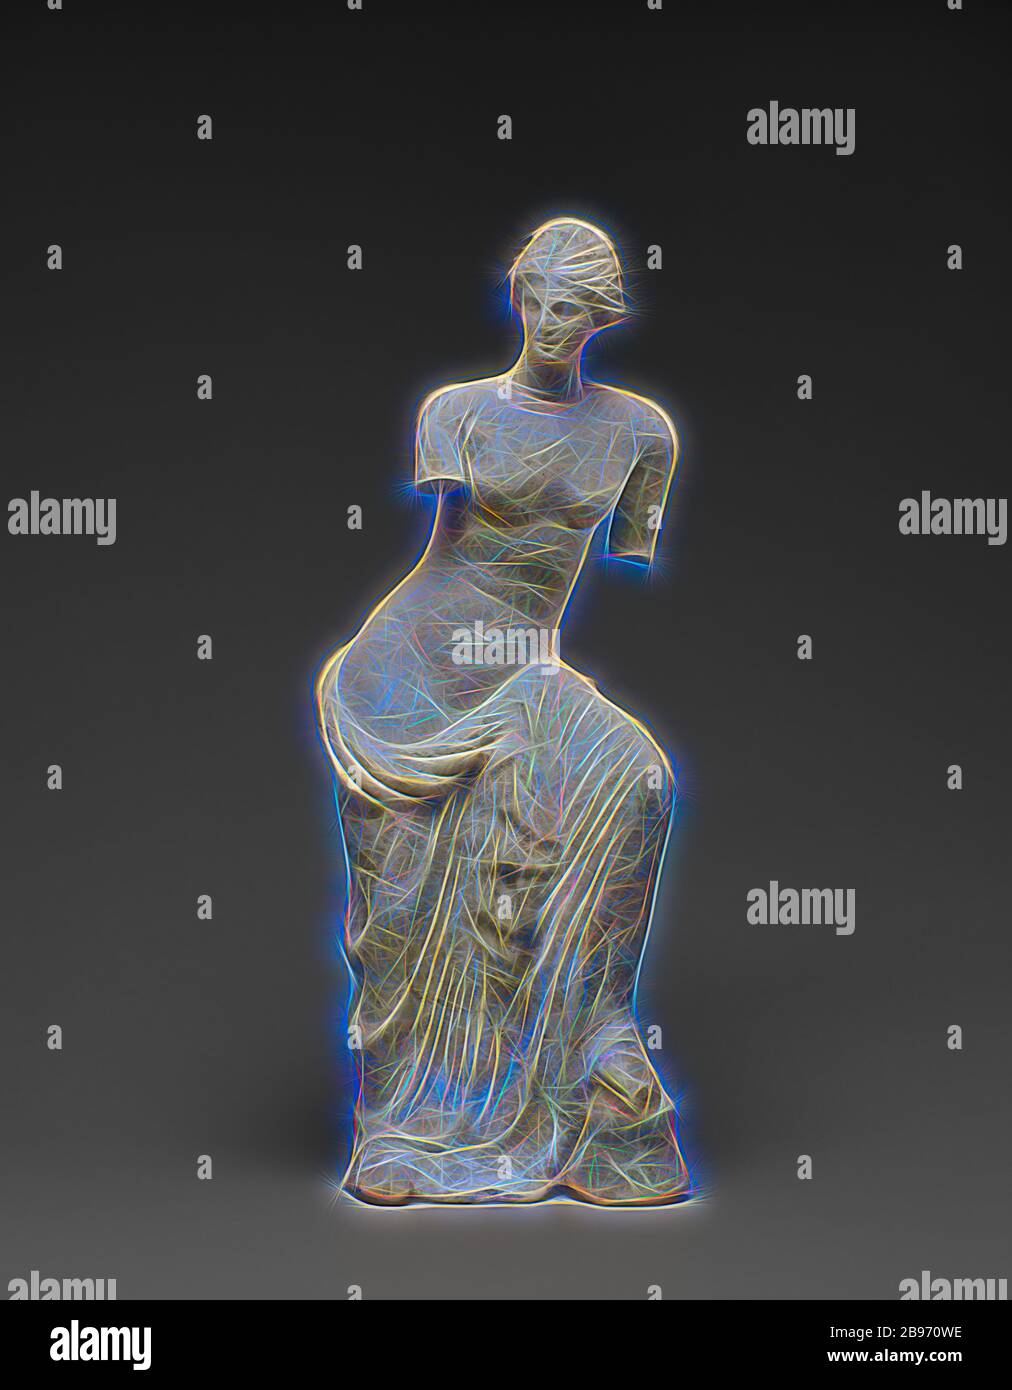 Statuette of Aphrodite, Unknown, Centuripe, Sicily, Italy, 300 - 200 B.C., Terracotta with white slip and polychromy (light blue, pink, red), 28.7 × 10.7 cm (11 5/16 × 4 3/16 in.), Reimagined by Gibon, design of warm cheerful glowing of brightness and light rays radiance. Classic art reinvented with a modern twist. Photography inspired by futurism, embracing dynamic energy of modern technology, movement, speed and revolutionize culture. Stock Photo